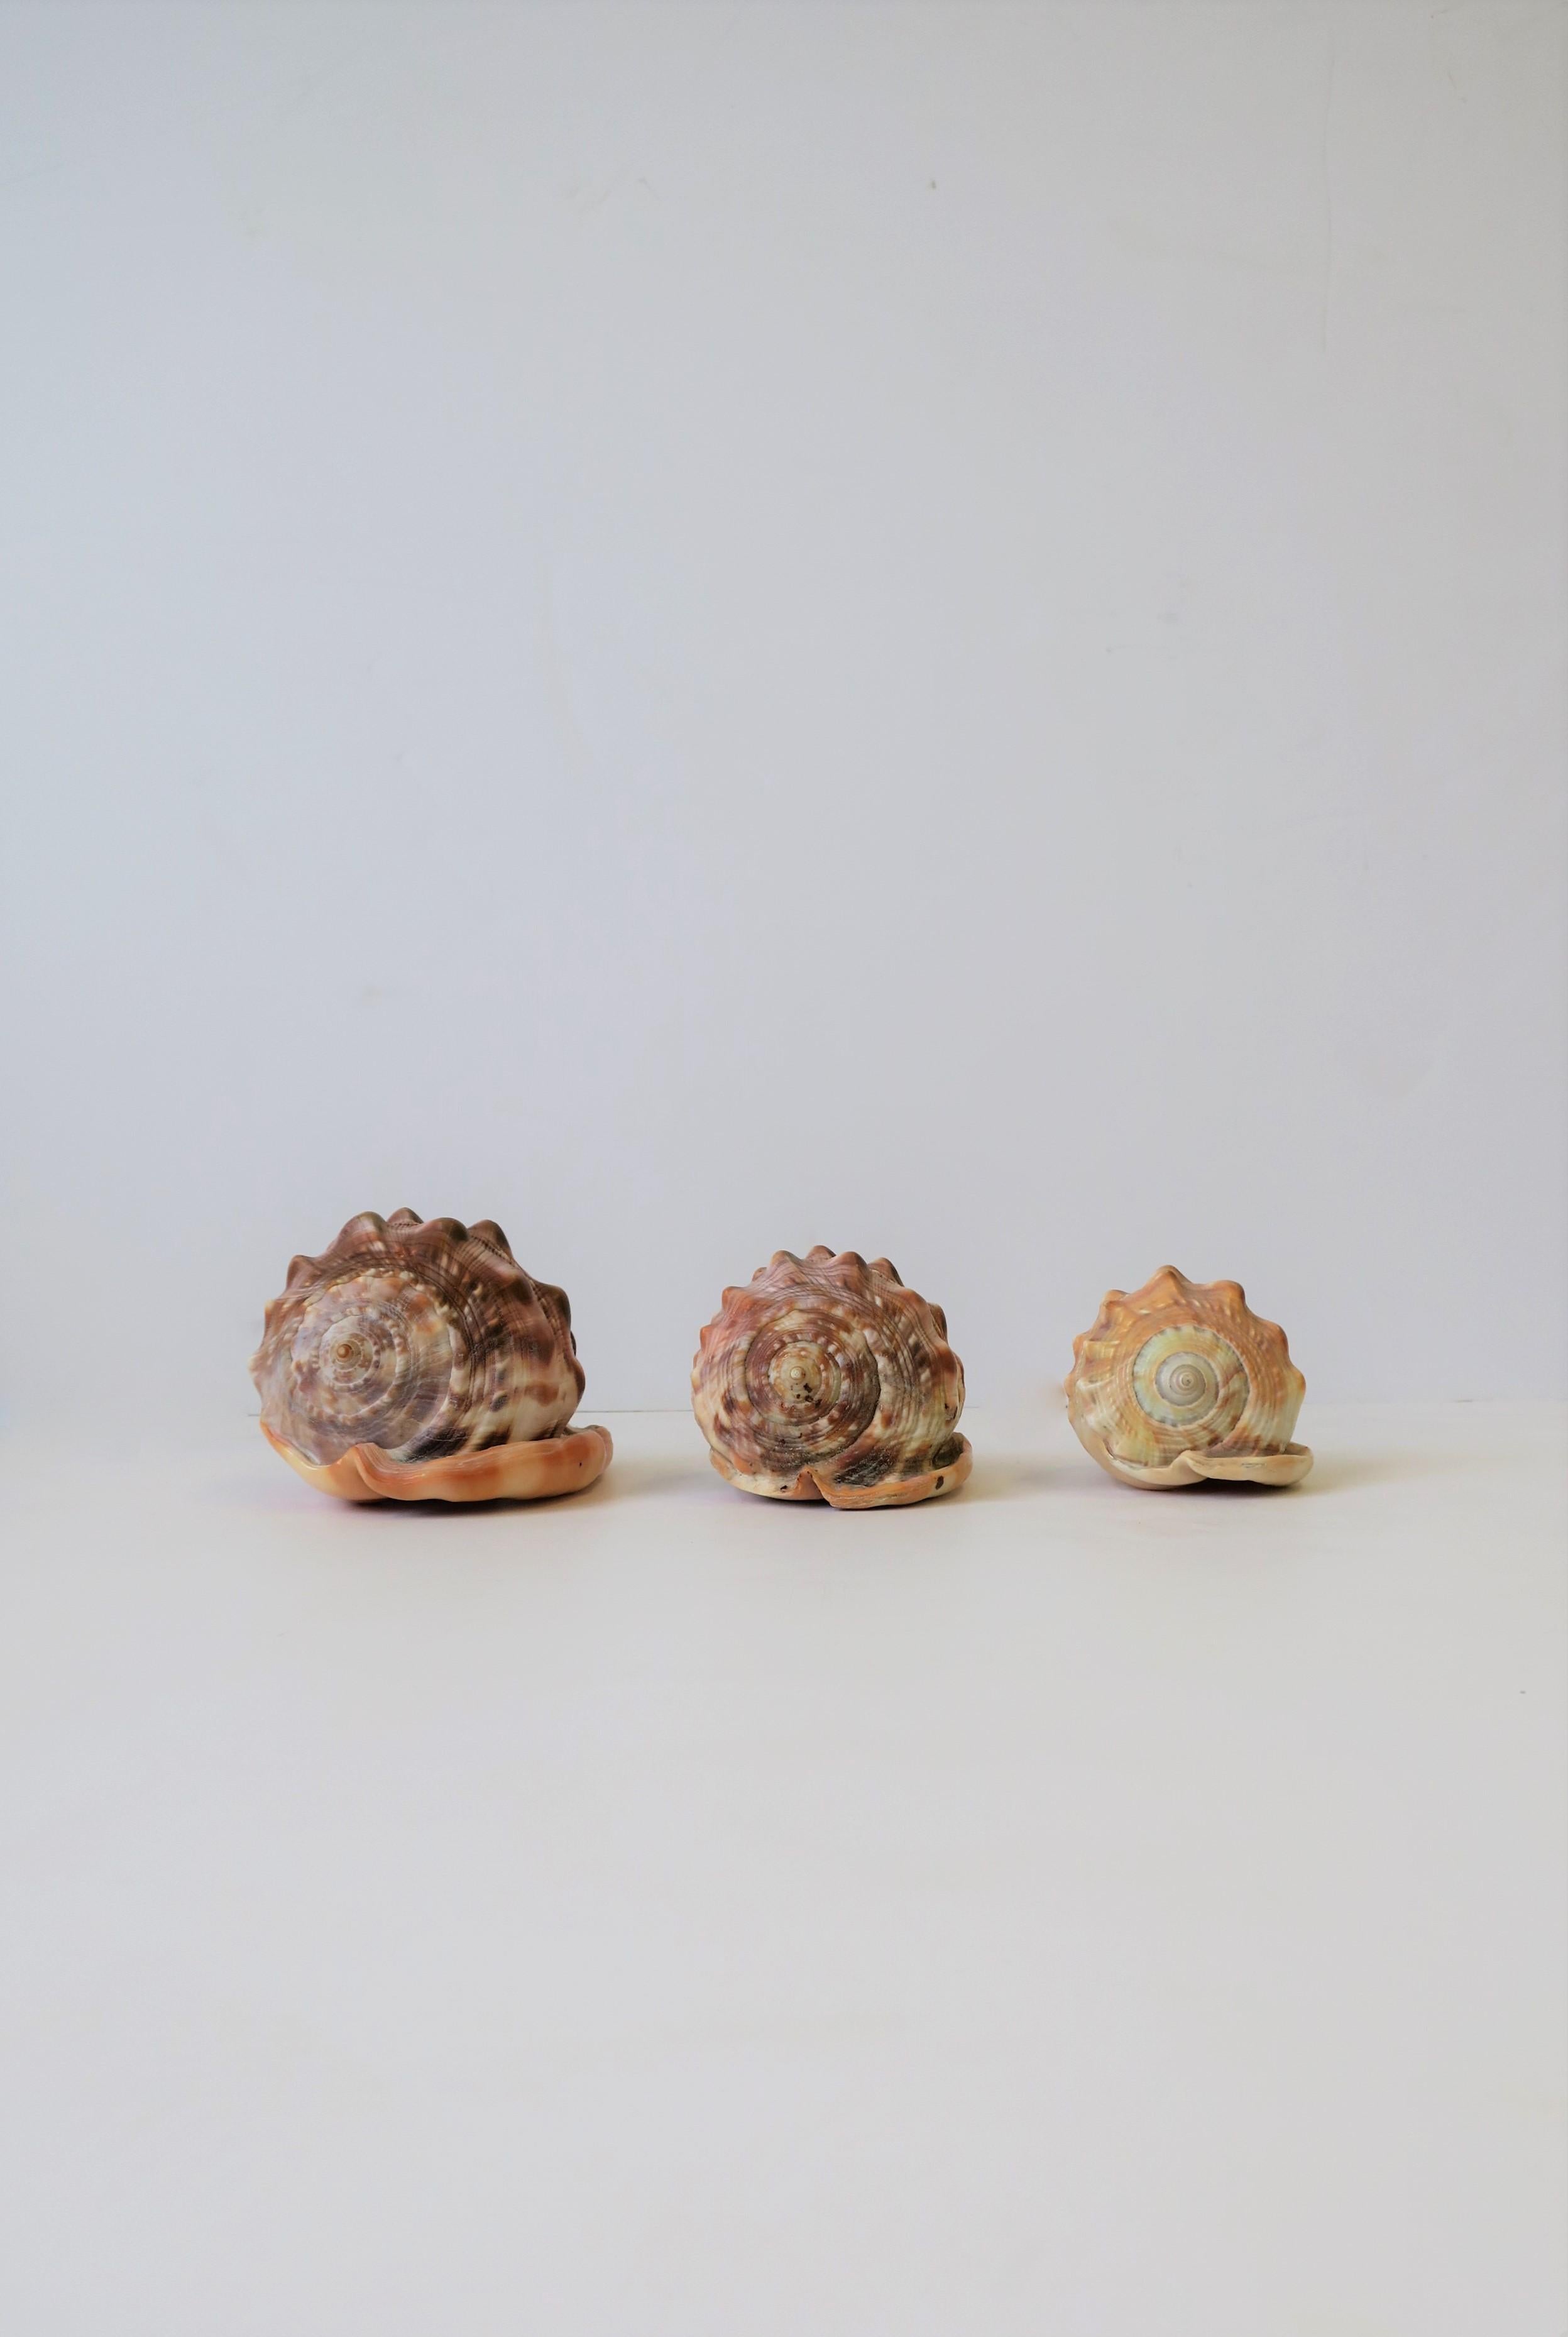 A beautiful set of three (3) natural seashells. These seashells are very beautiful, substantial, and strong in a pink/salmon hue. Measurements from L to R: 

A. 4.25